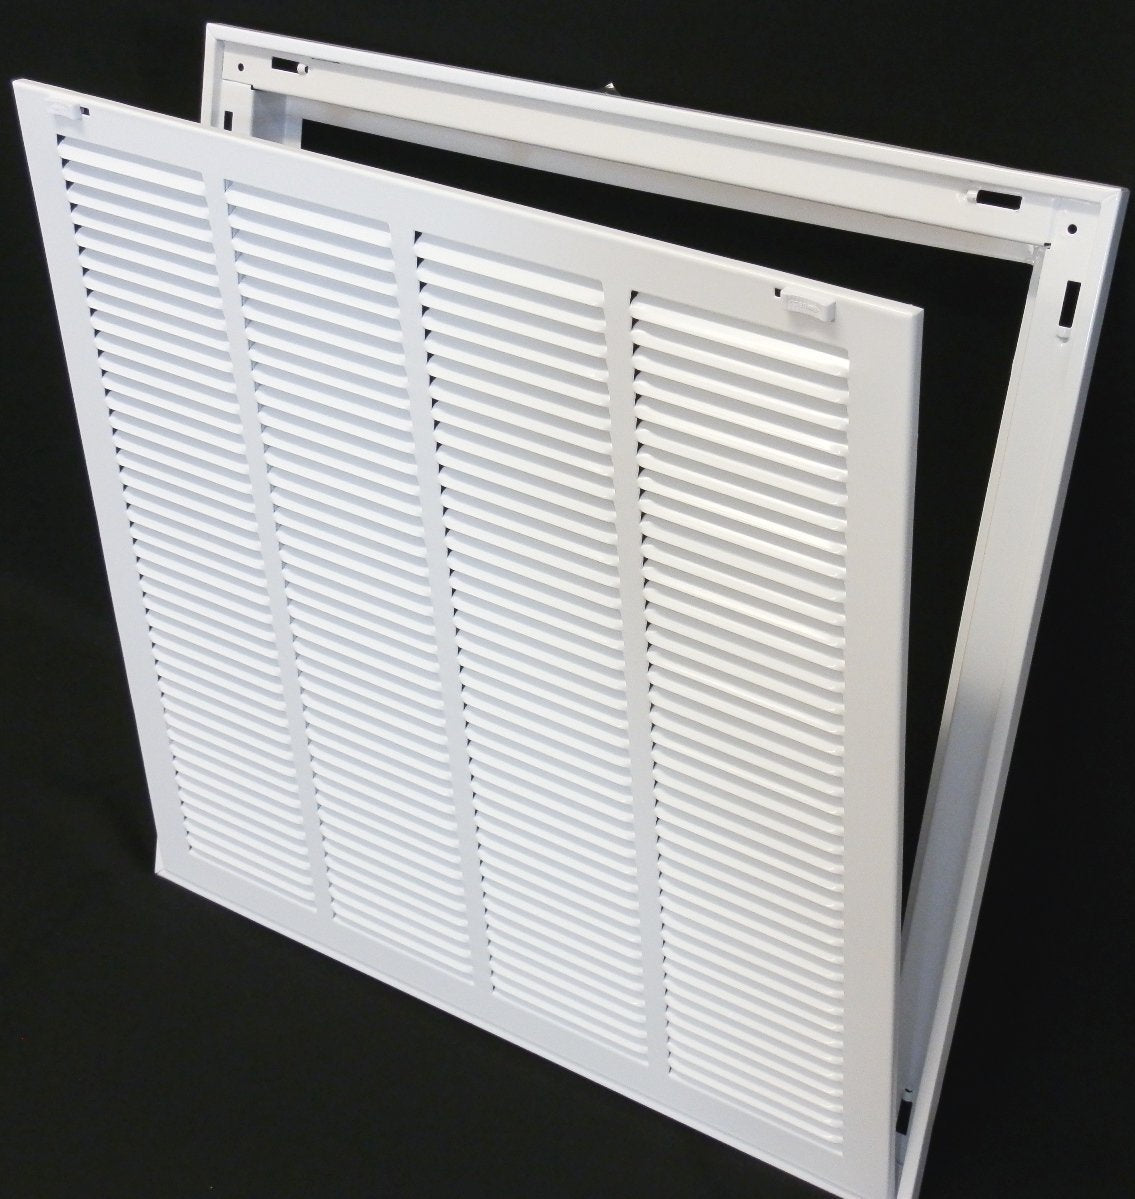 8&quot; X 34&quot; Steel Return Air Filter Grille for 1&quot; Filter - Removable Frame - [Outer Dimensions: 10 5/8&quot; X 36 5/8&quot;]